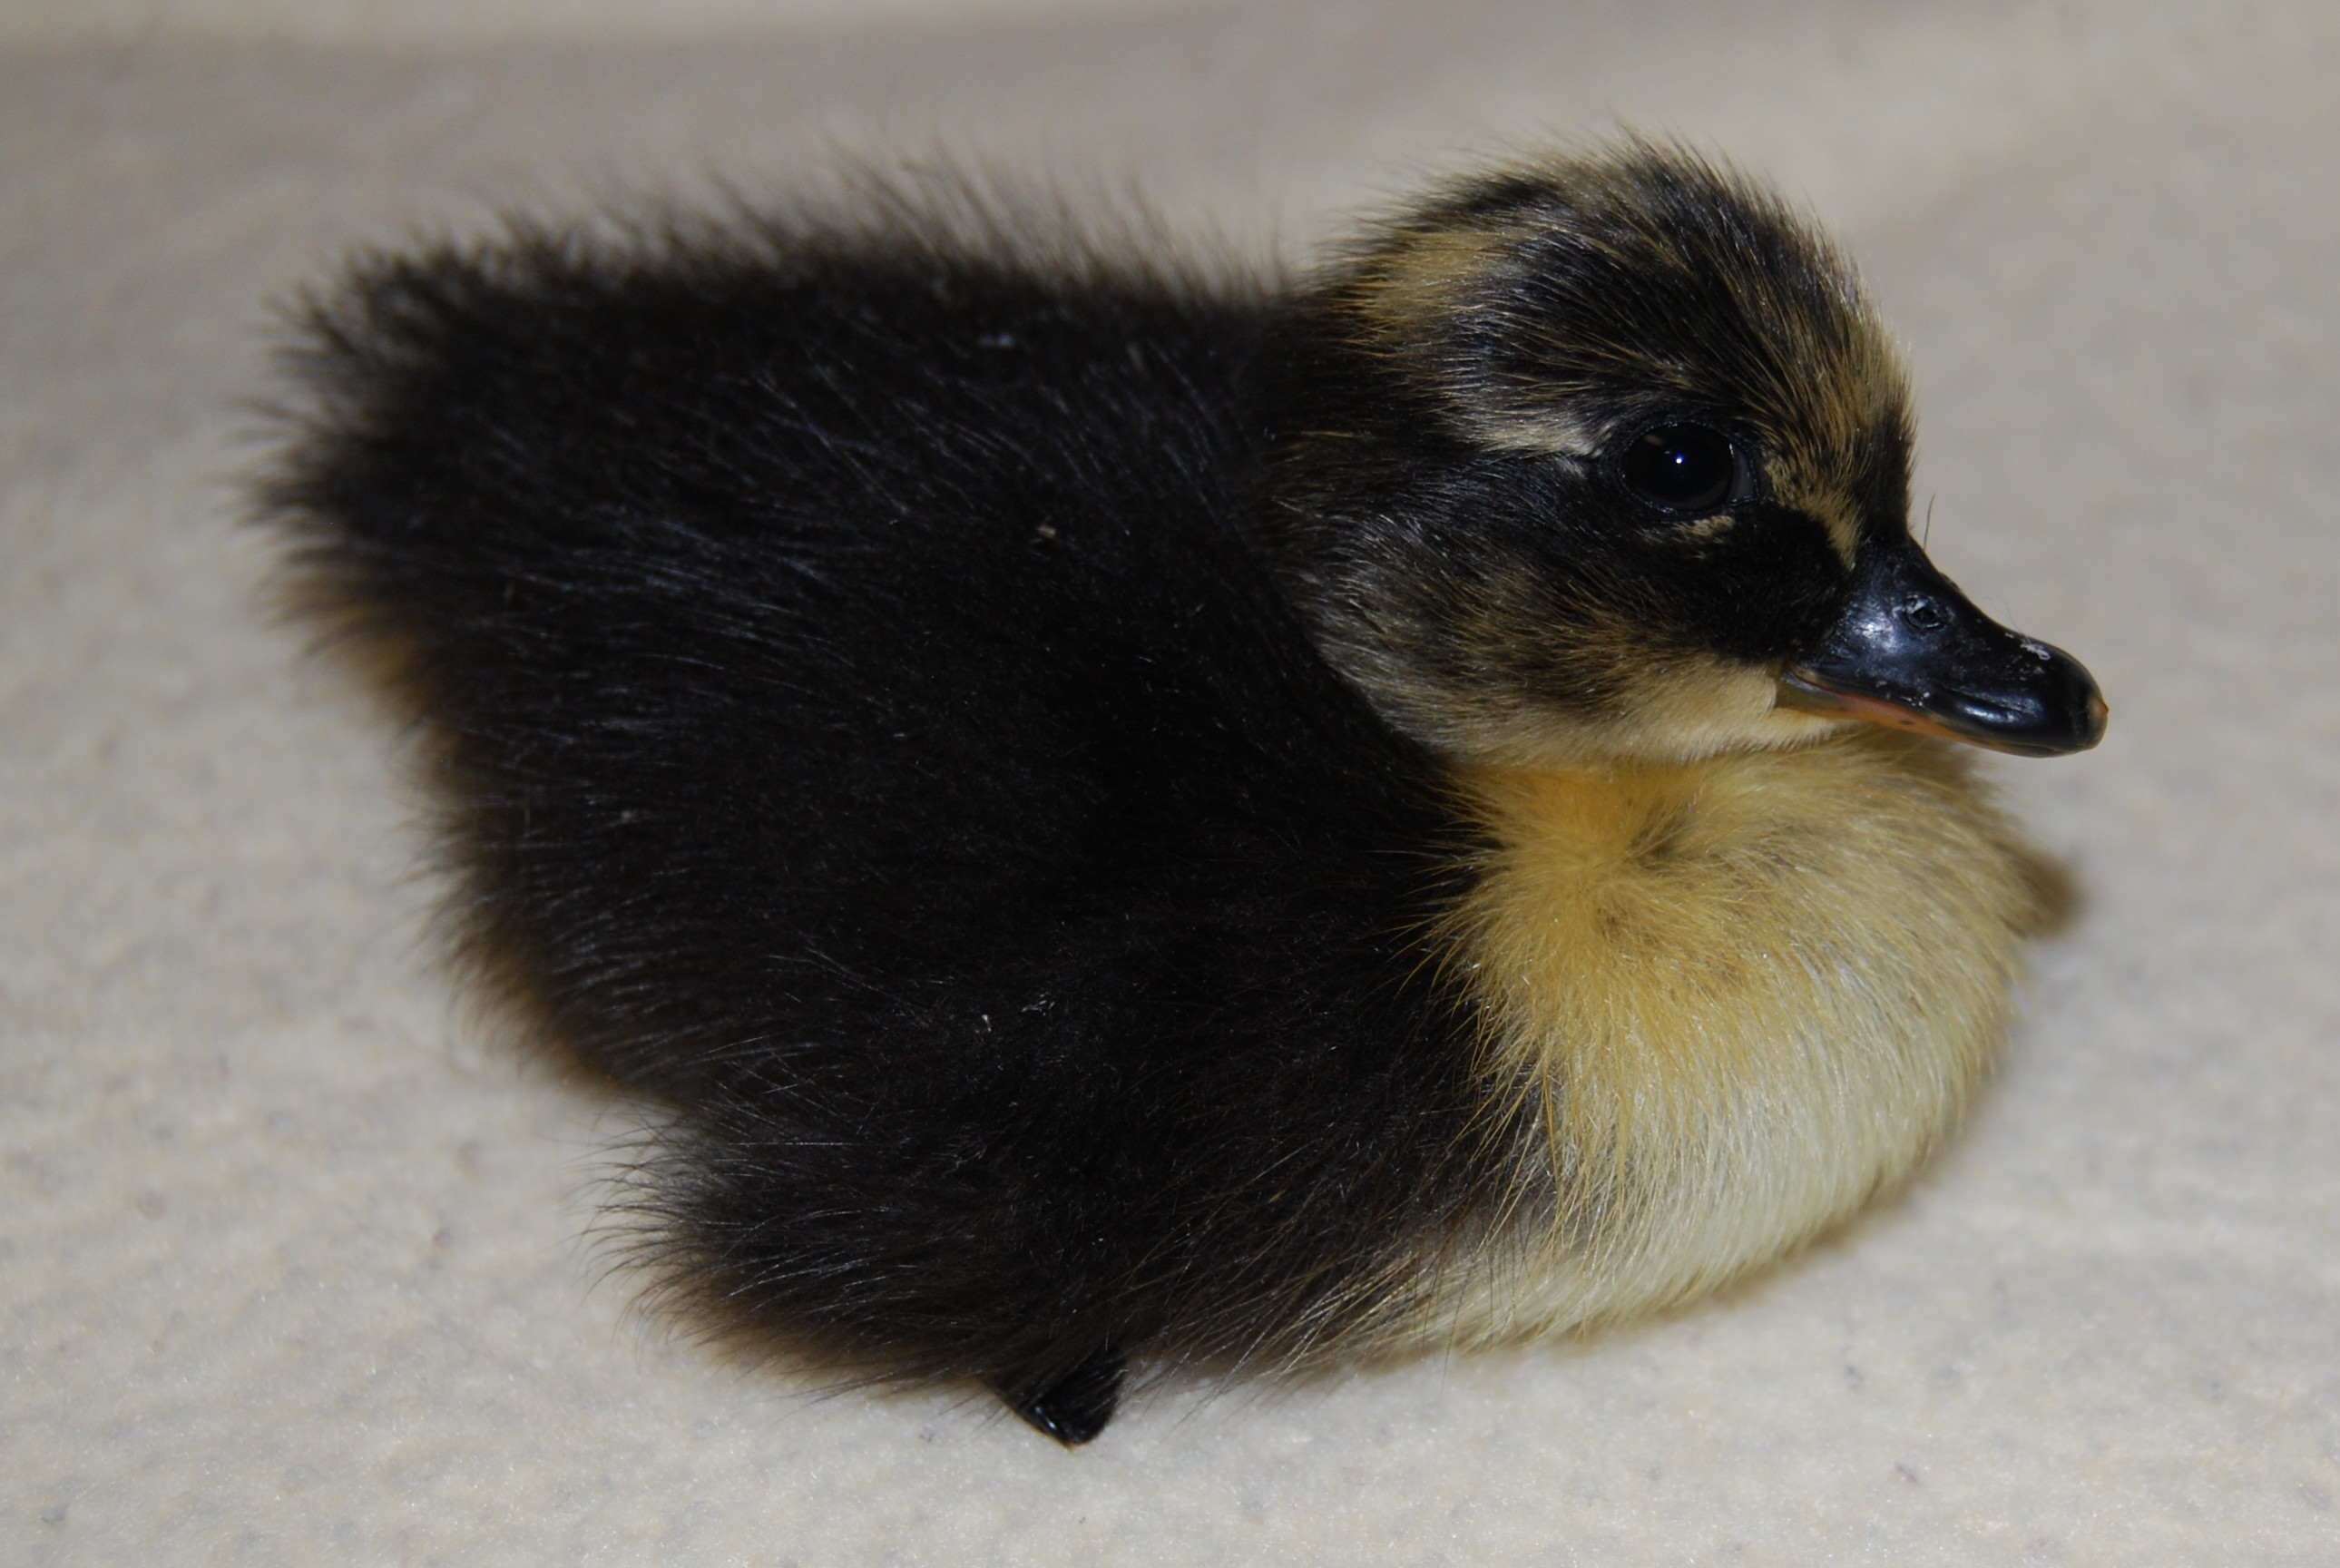 my new duck born on memorial day